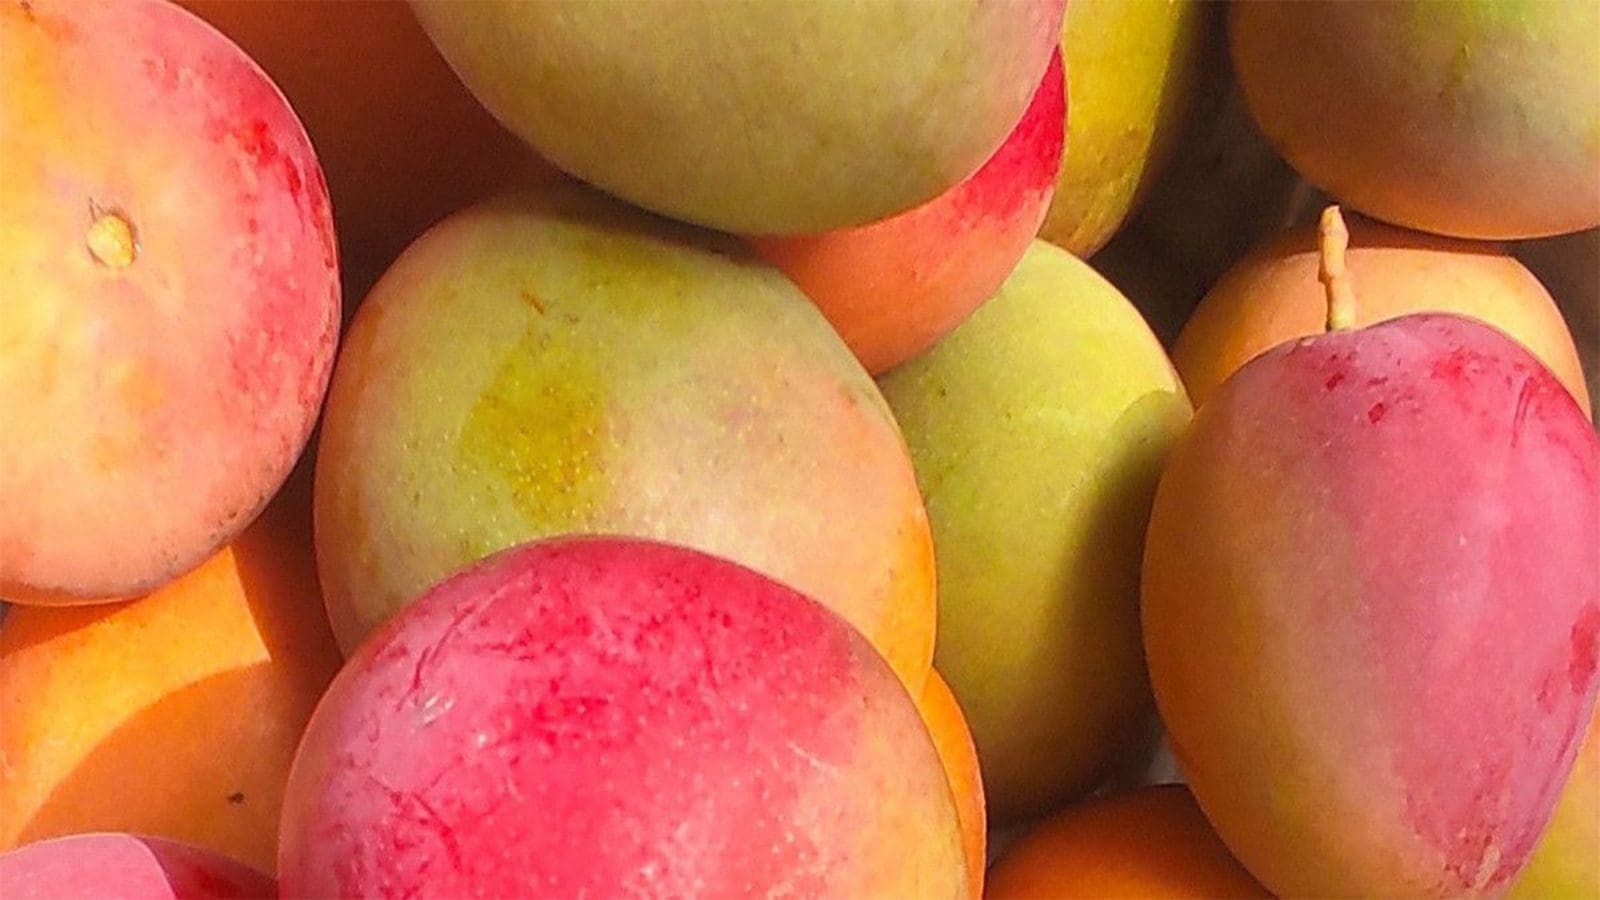 Burkina Faso approves import of biopesticides to fight fruit flies in Mangoes